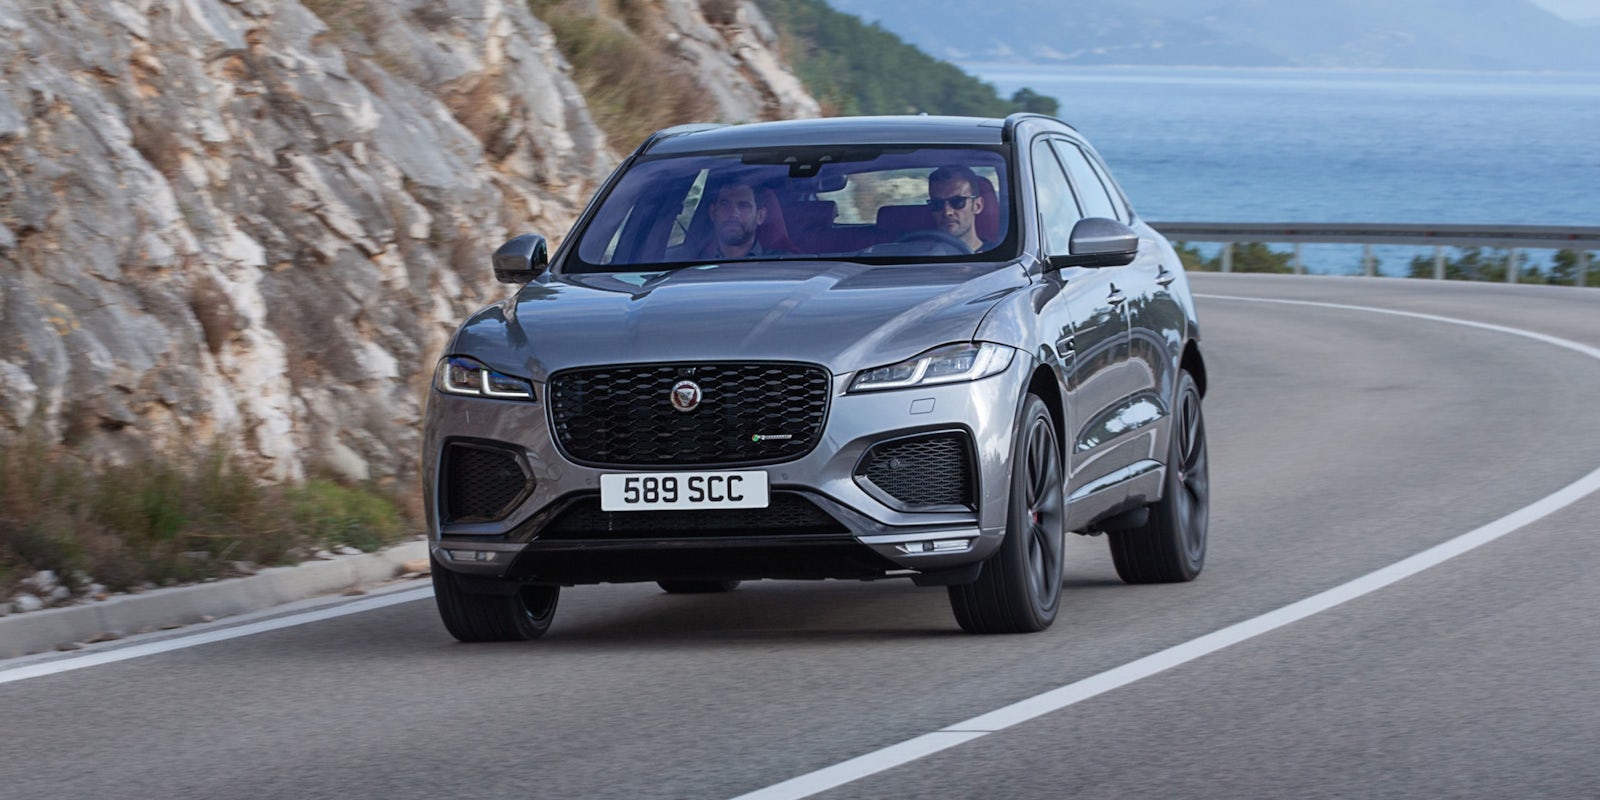 21 Jaguar F Pace Hybrid Revealed Price Specs And Release Date Carwow